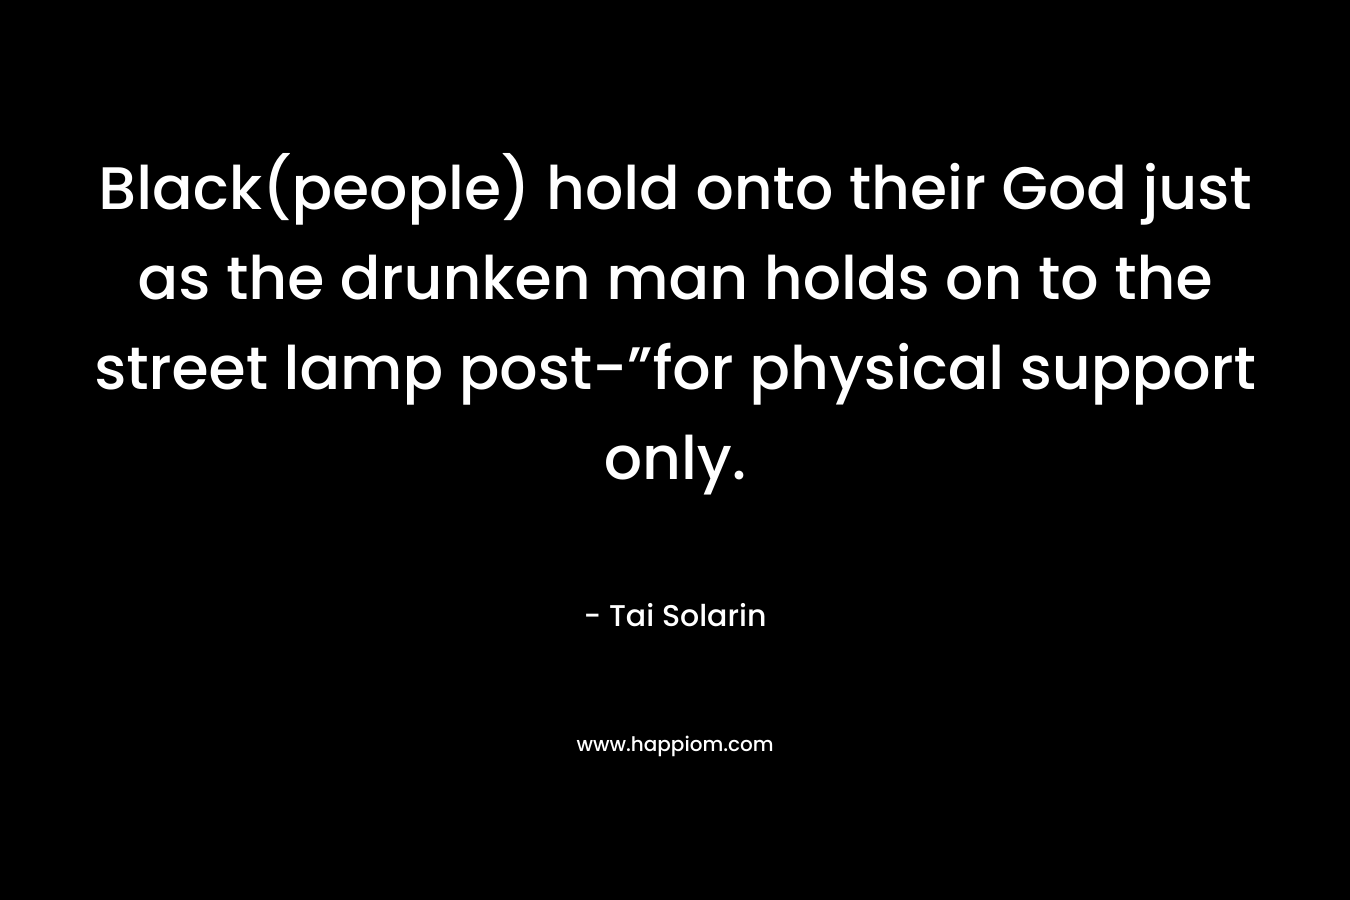 Black(people) hold onto their God just as the drunken man holds on to the street lamp post-”for physical support only. – Tai Solarin